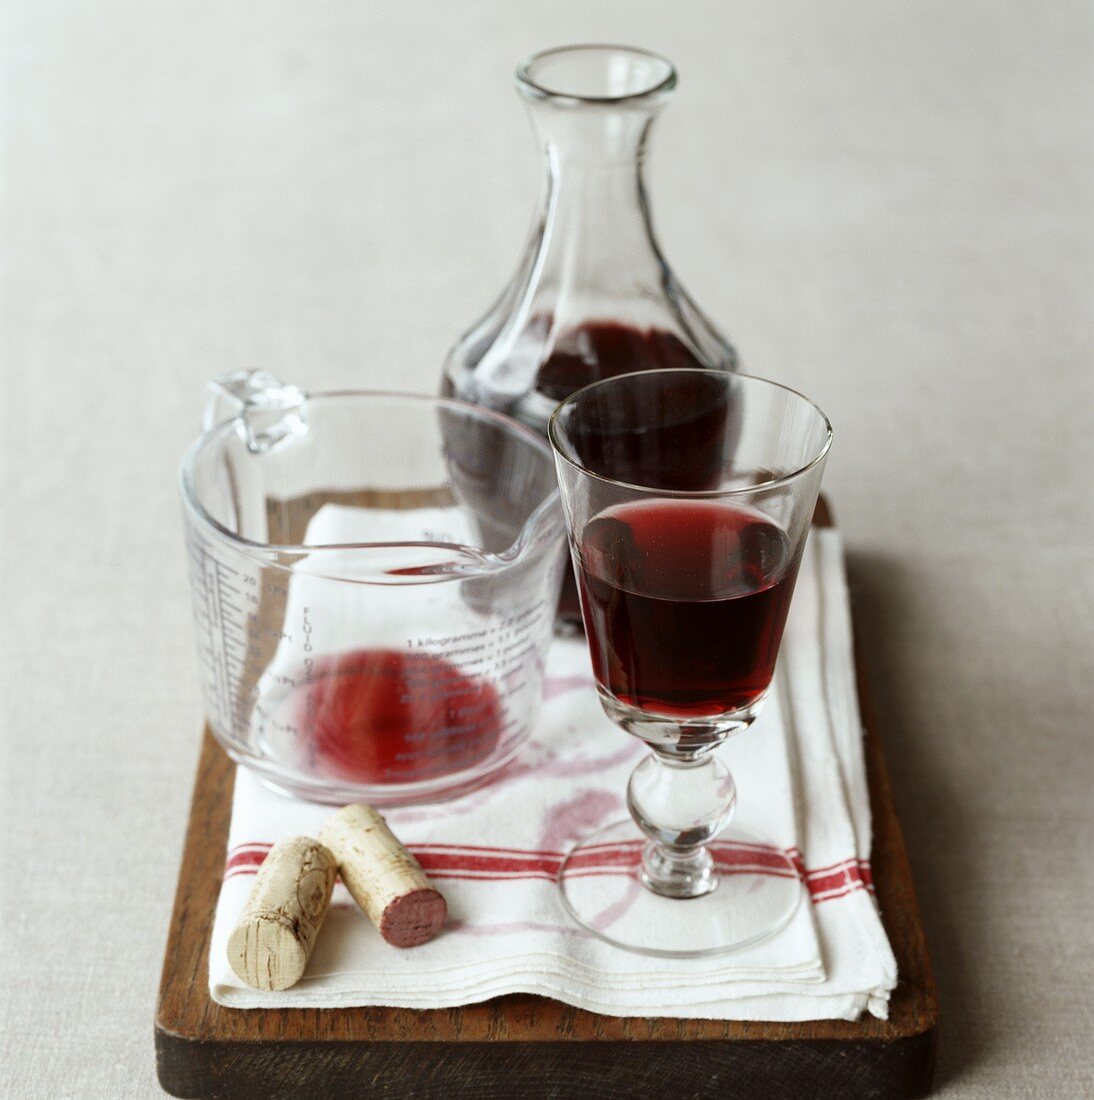 Red wine in glass, carafe and measuring jug on chopping board